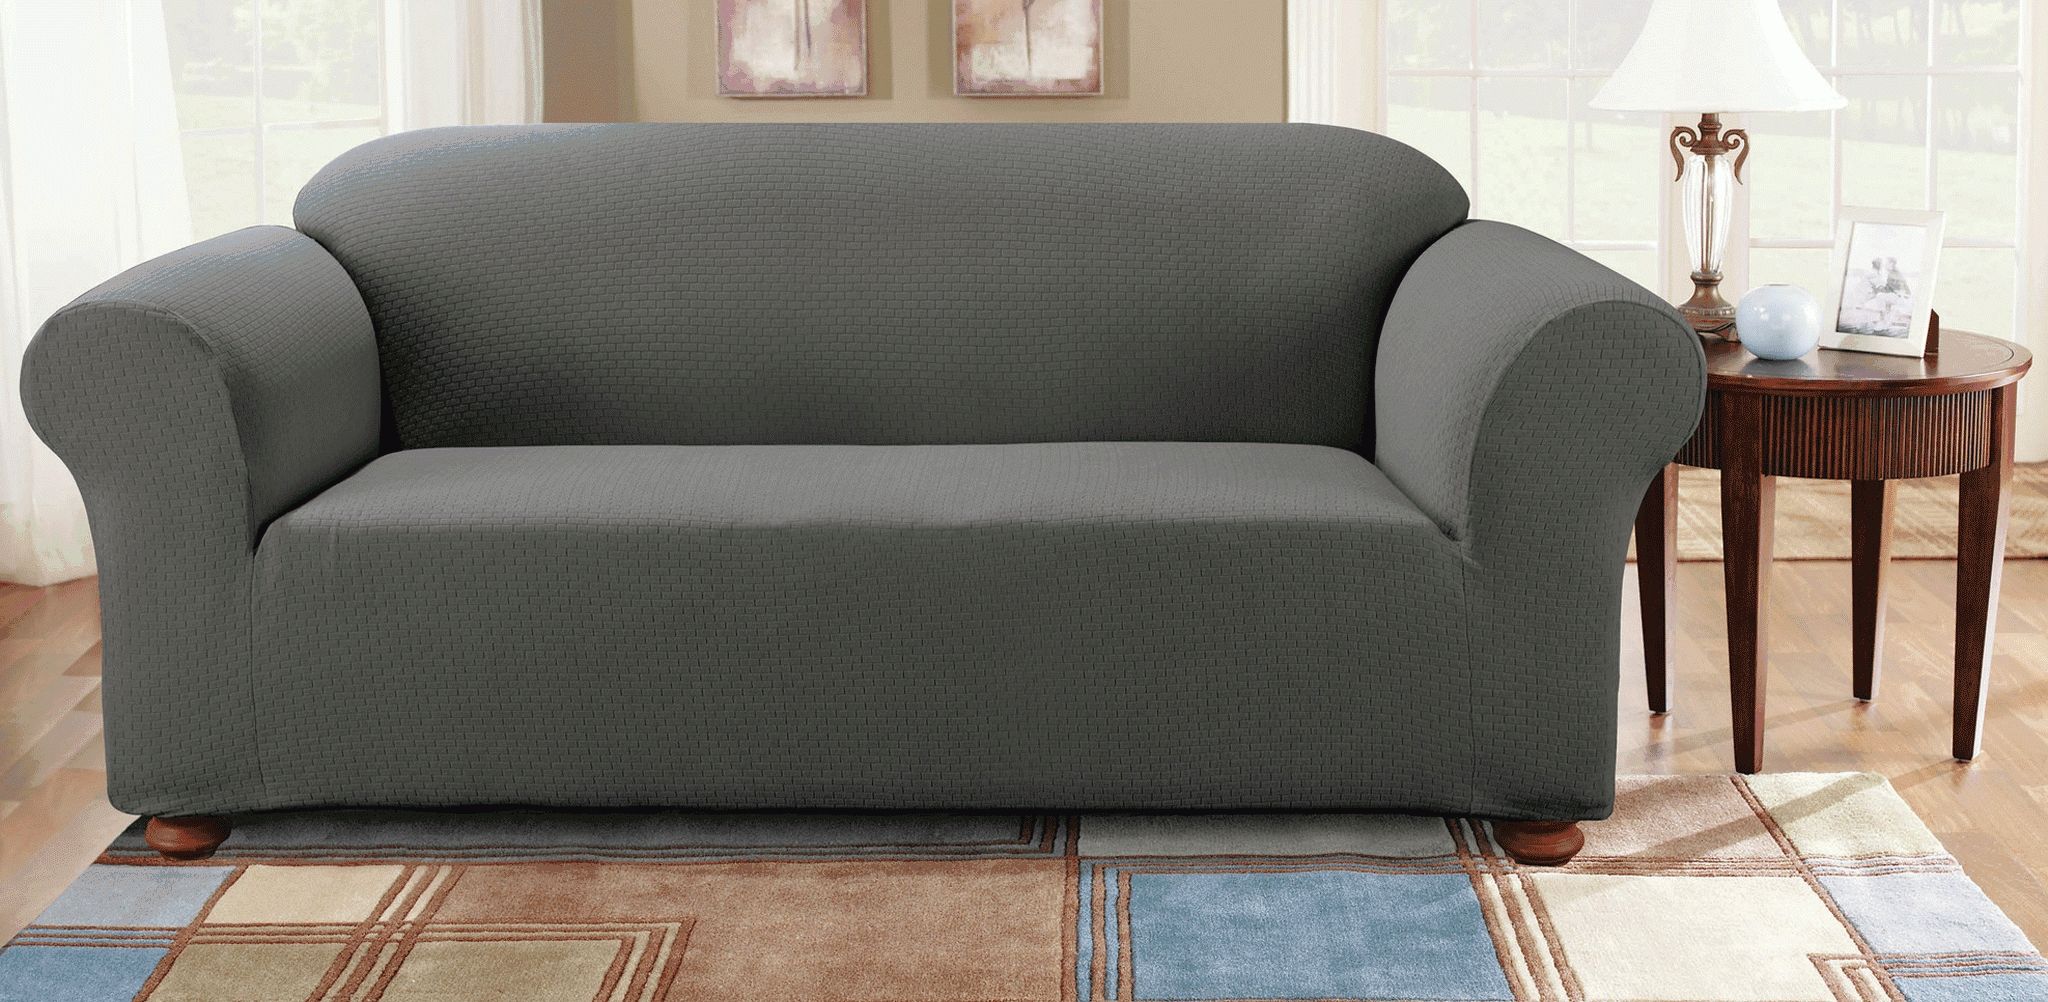 Furniture: Sofa Seat Covers | Couch Covers Walmart | Slipcovers Intended For Chaise Sofa Covers (View 12 of 20)